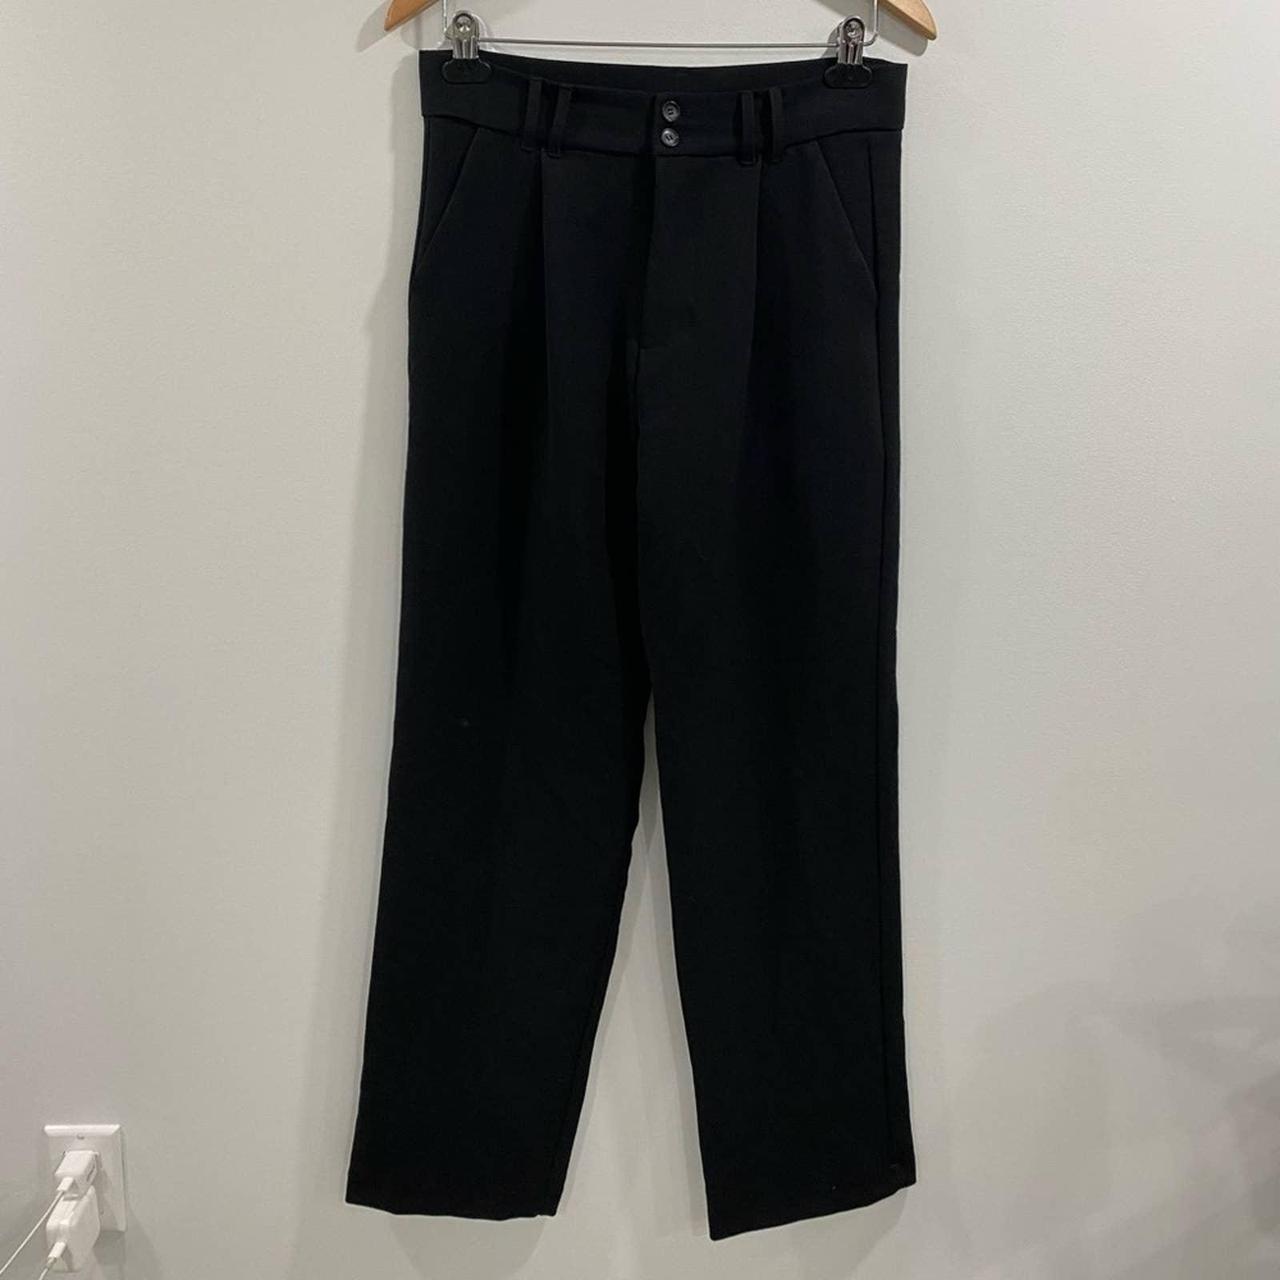 Xirena Tyce Pant Black - Size Small Great condition... - Depop